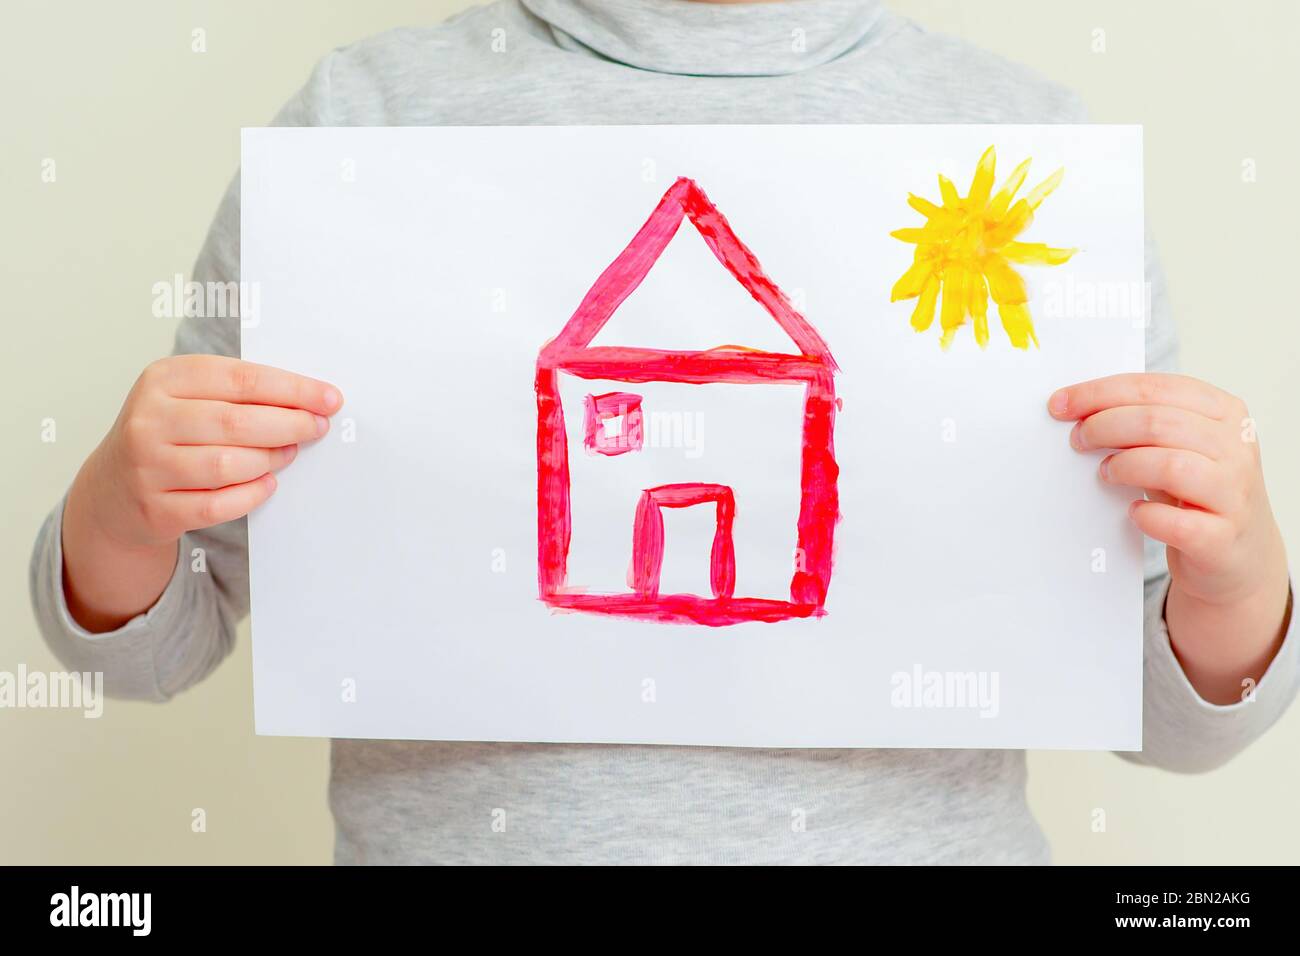 Closeup of child is holding picture of red house with sun at elementary school. Painting concept. Stock Photo